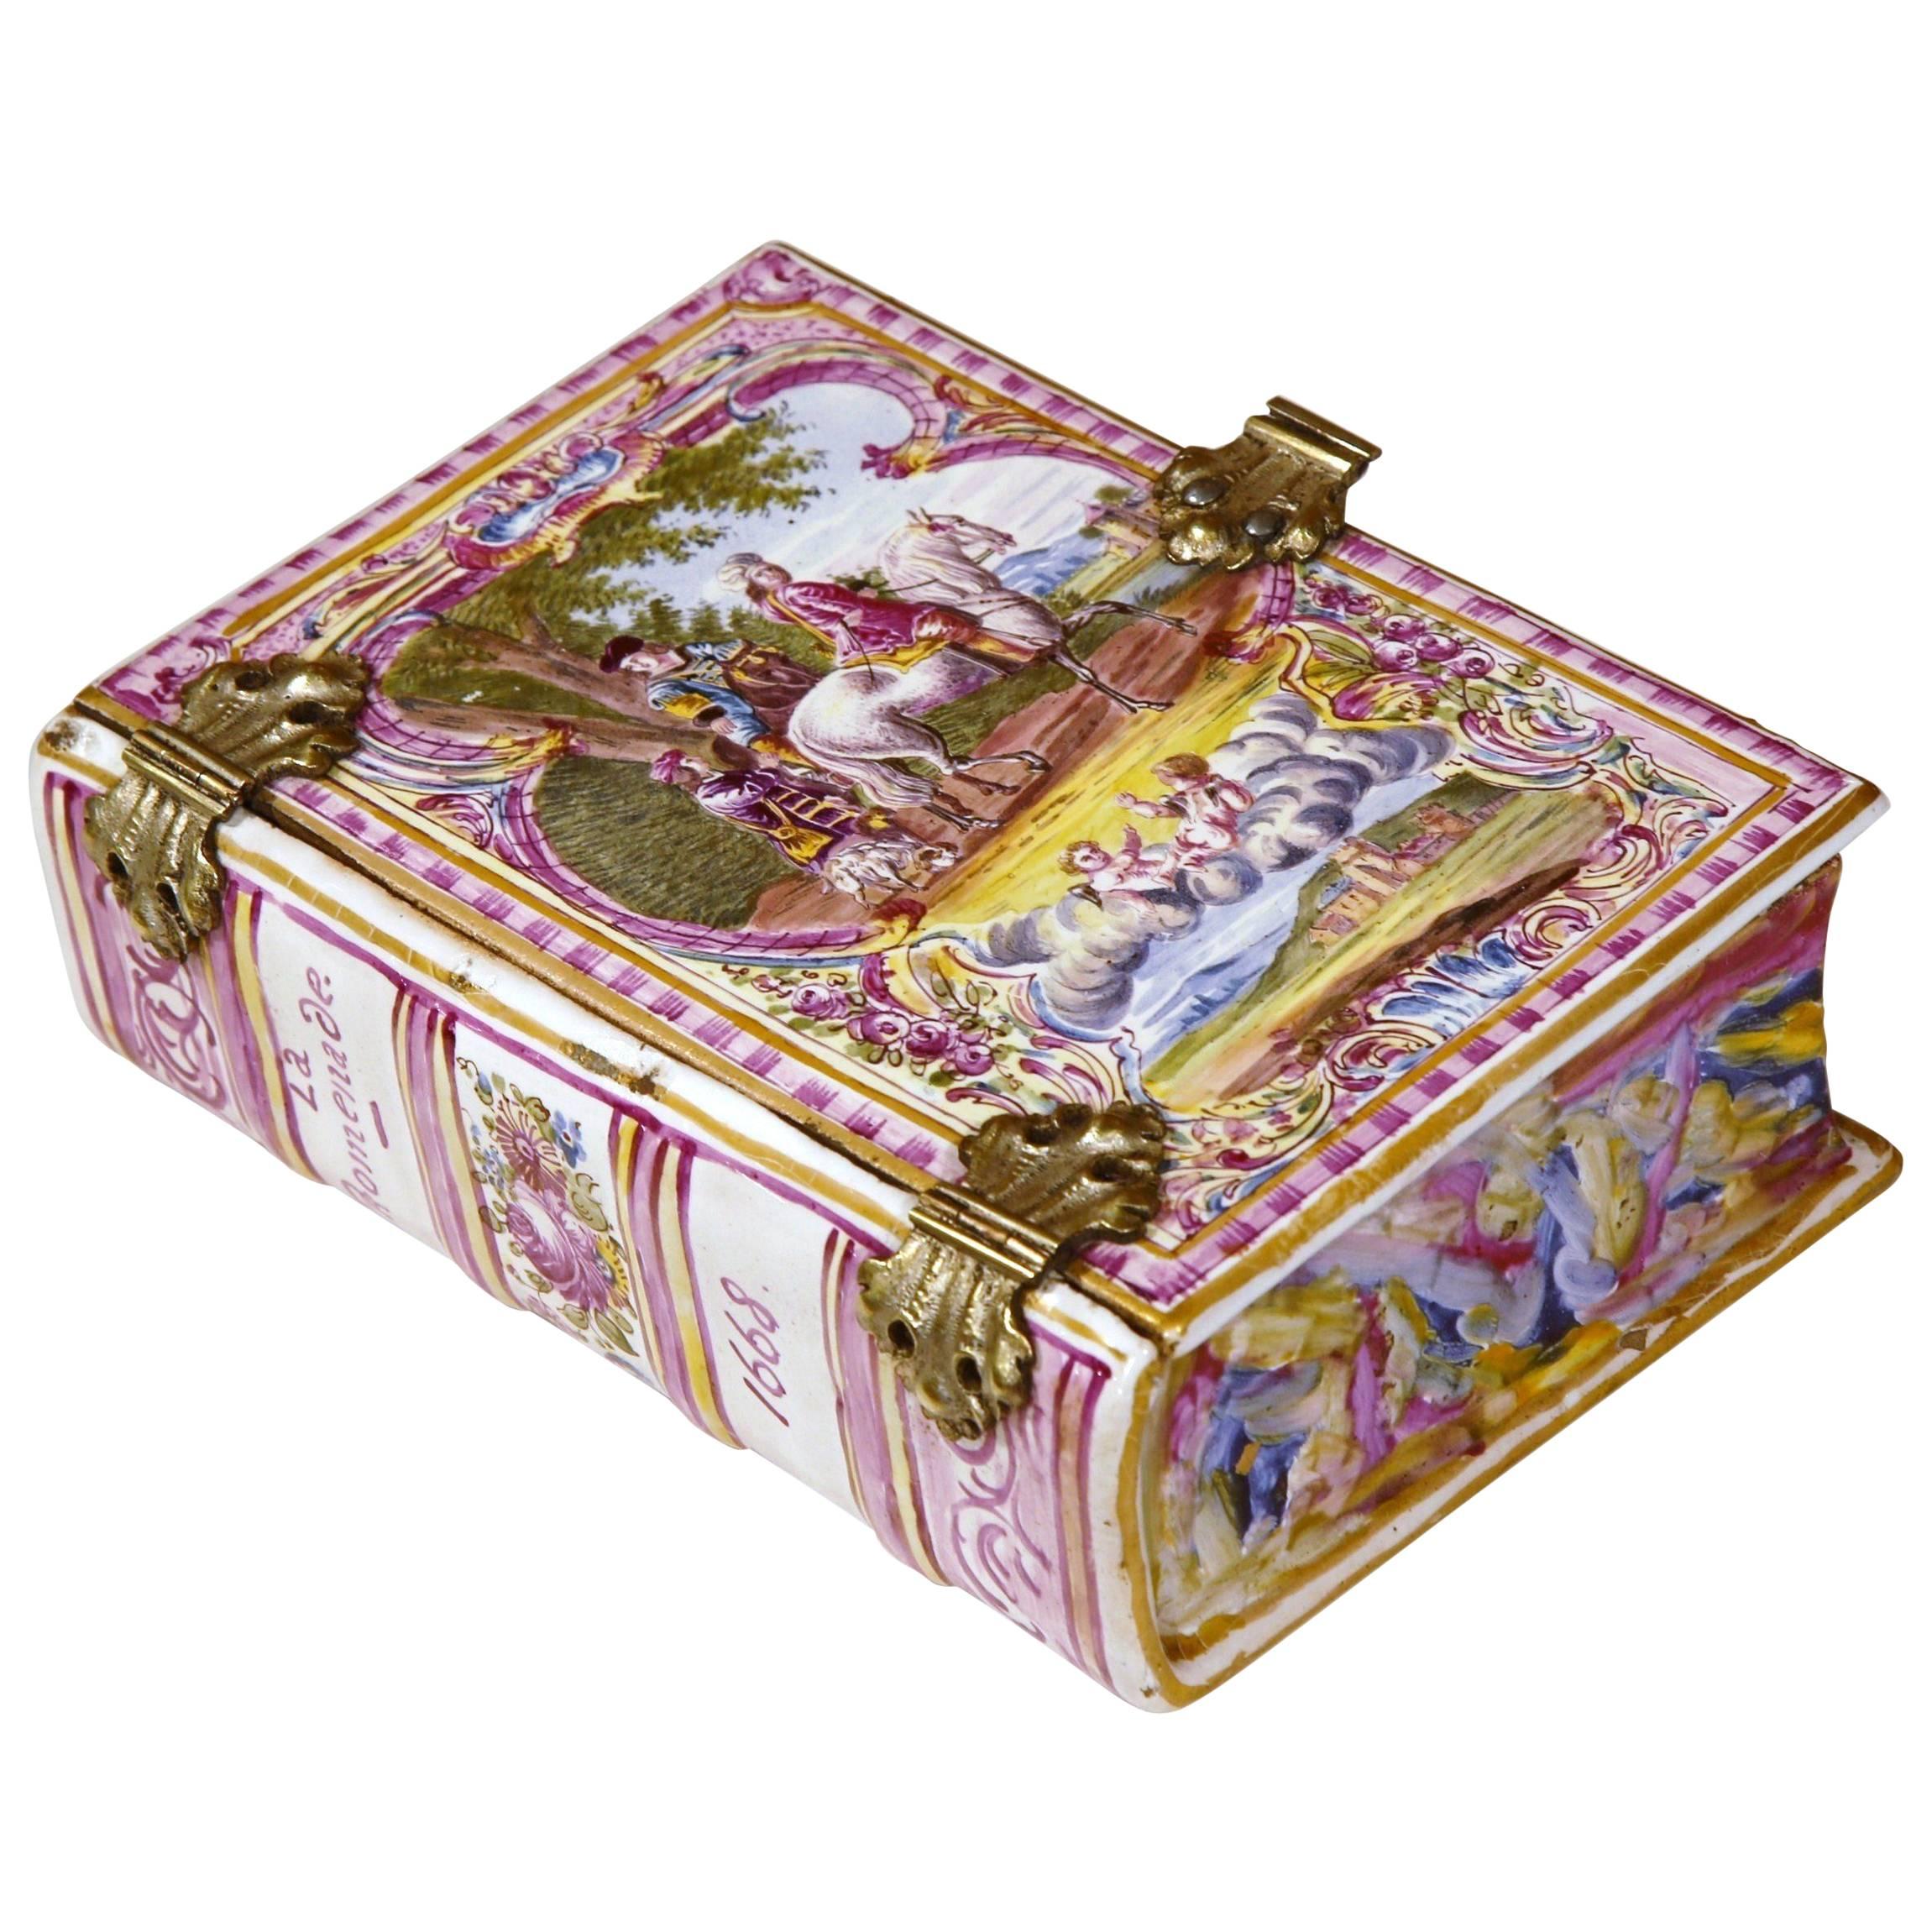 Early 19th Century French Hand-Painted Porcelain Jewelry Box Shaped as a Book